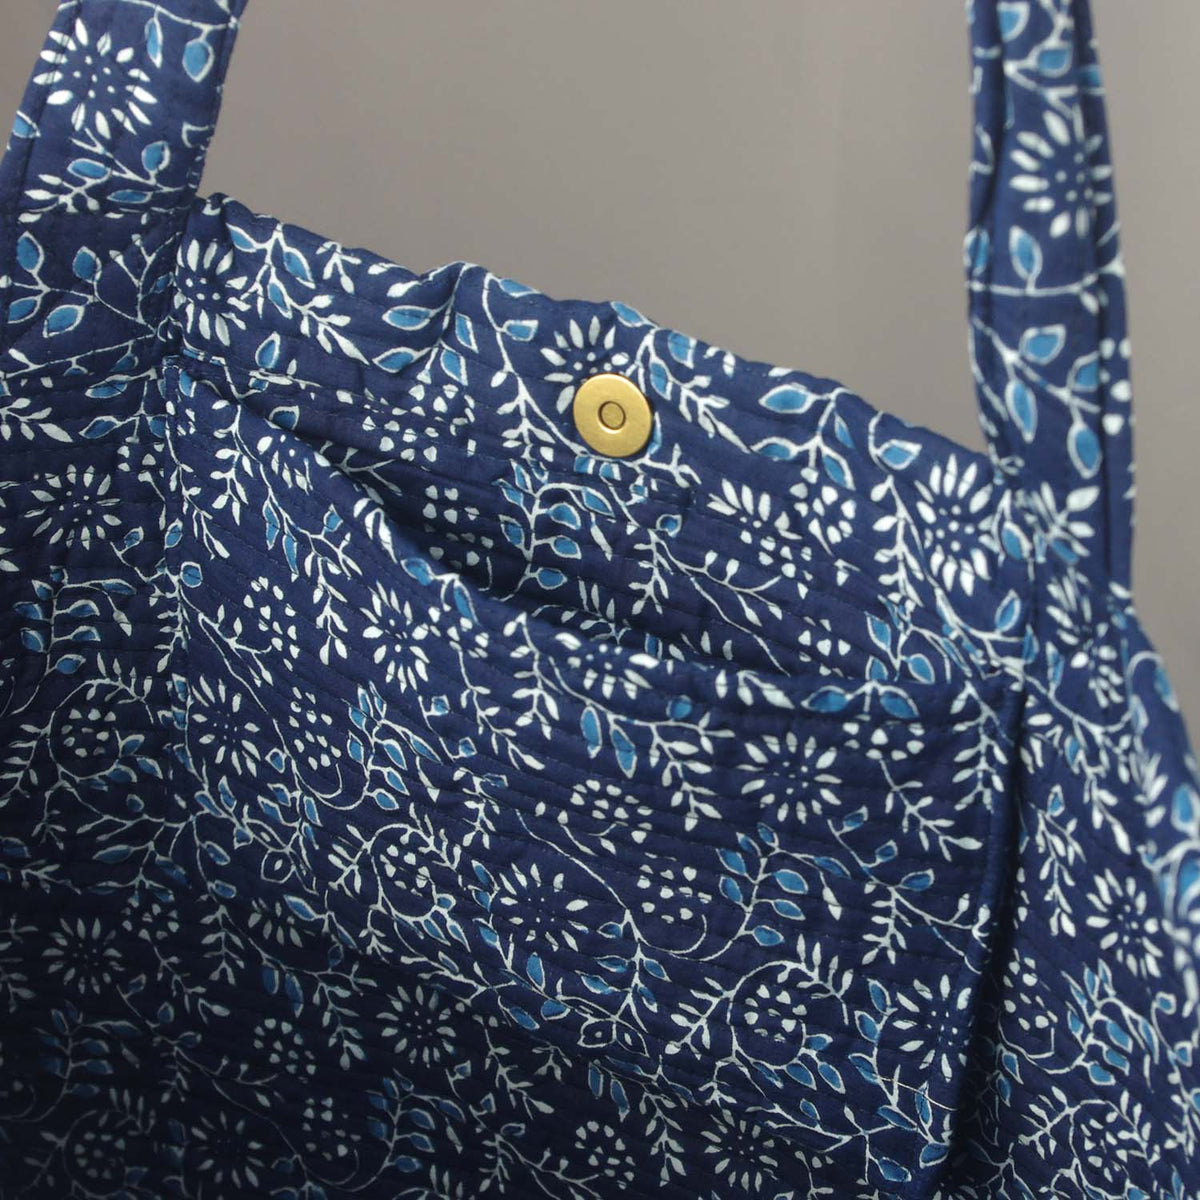 Cotton Quilted Large Shoppping / Beach Bag - Indigo Floral Jaal